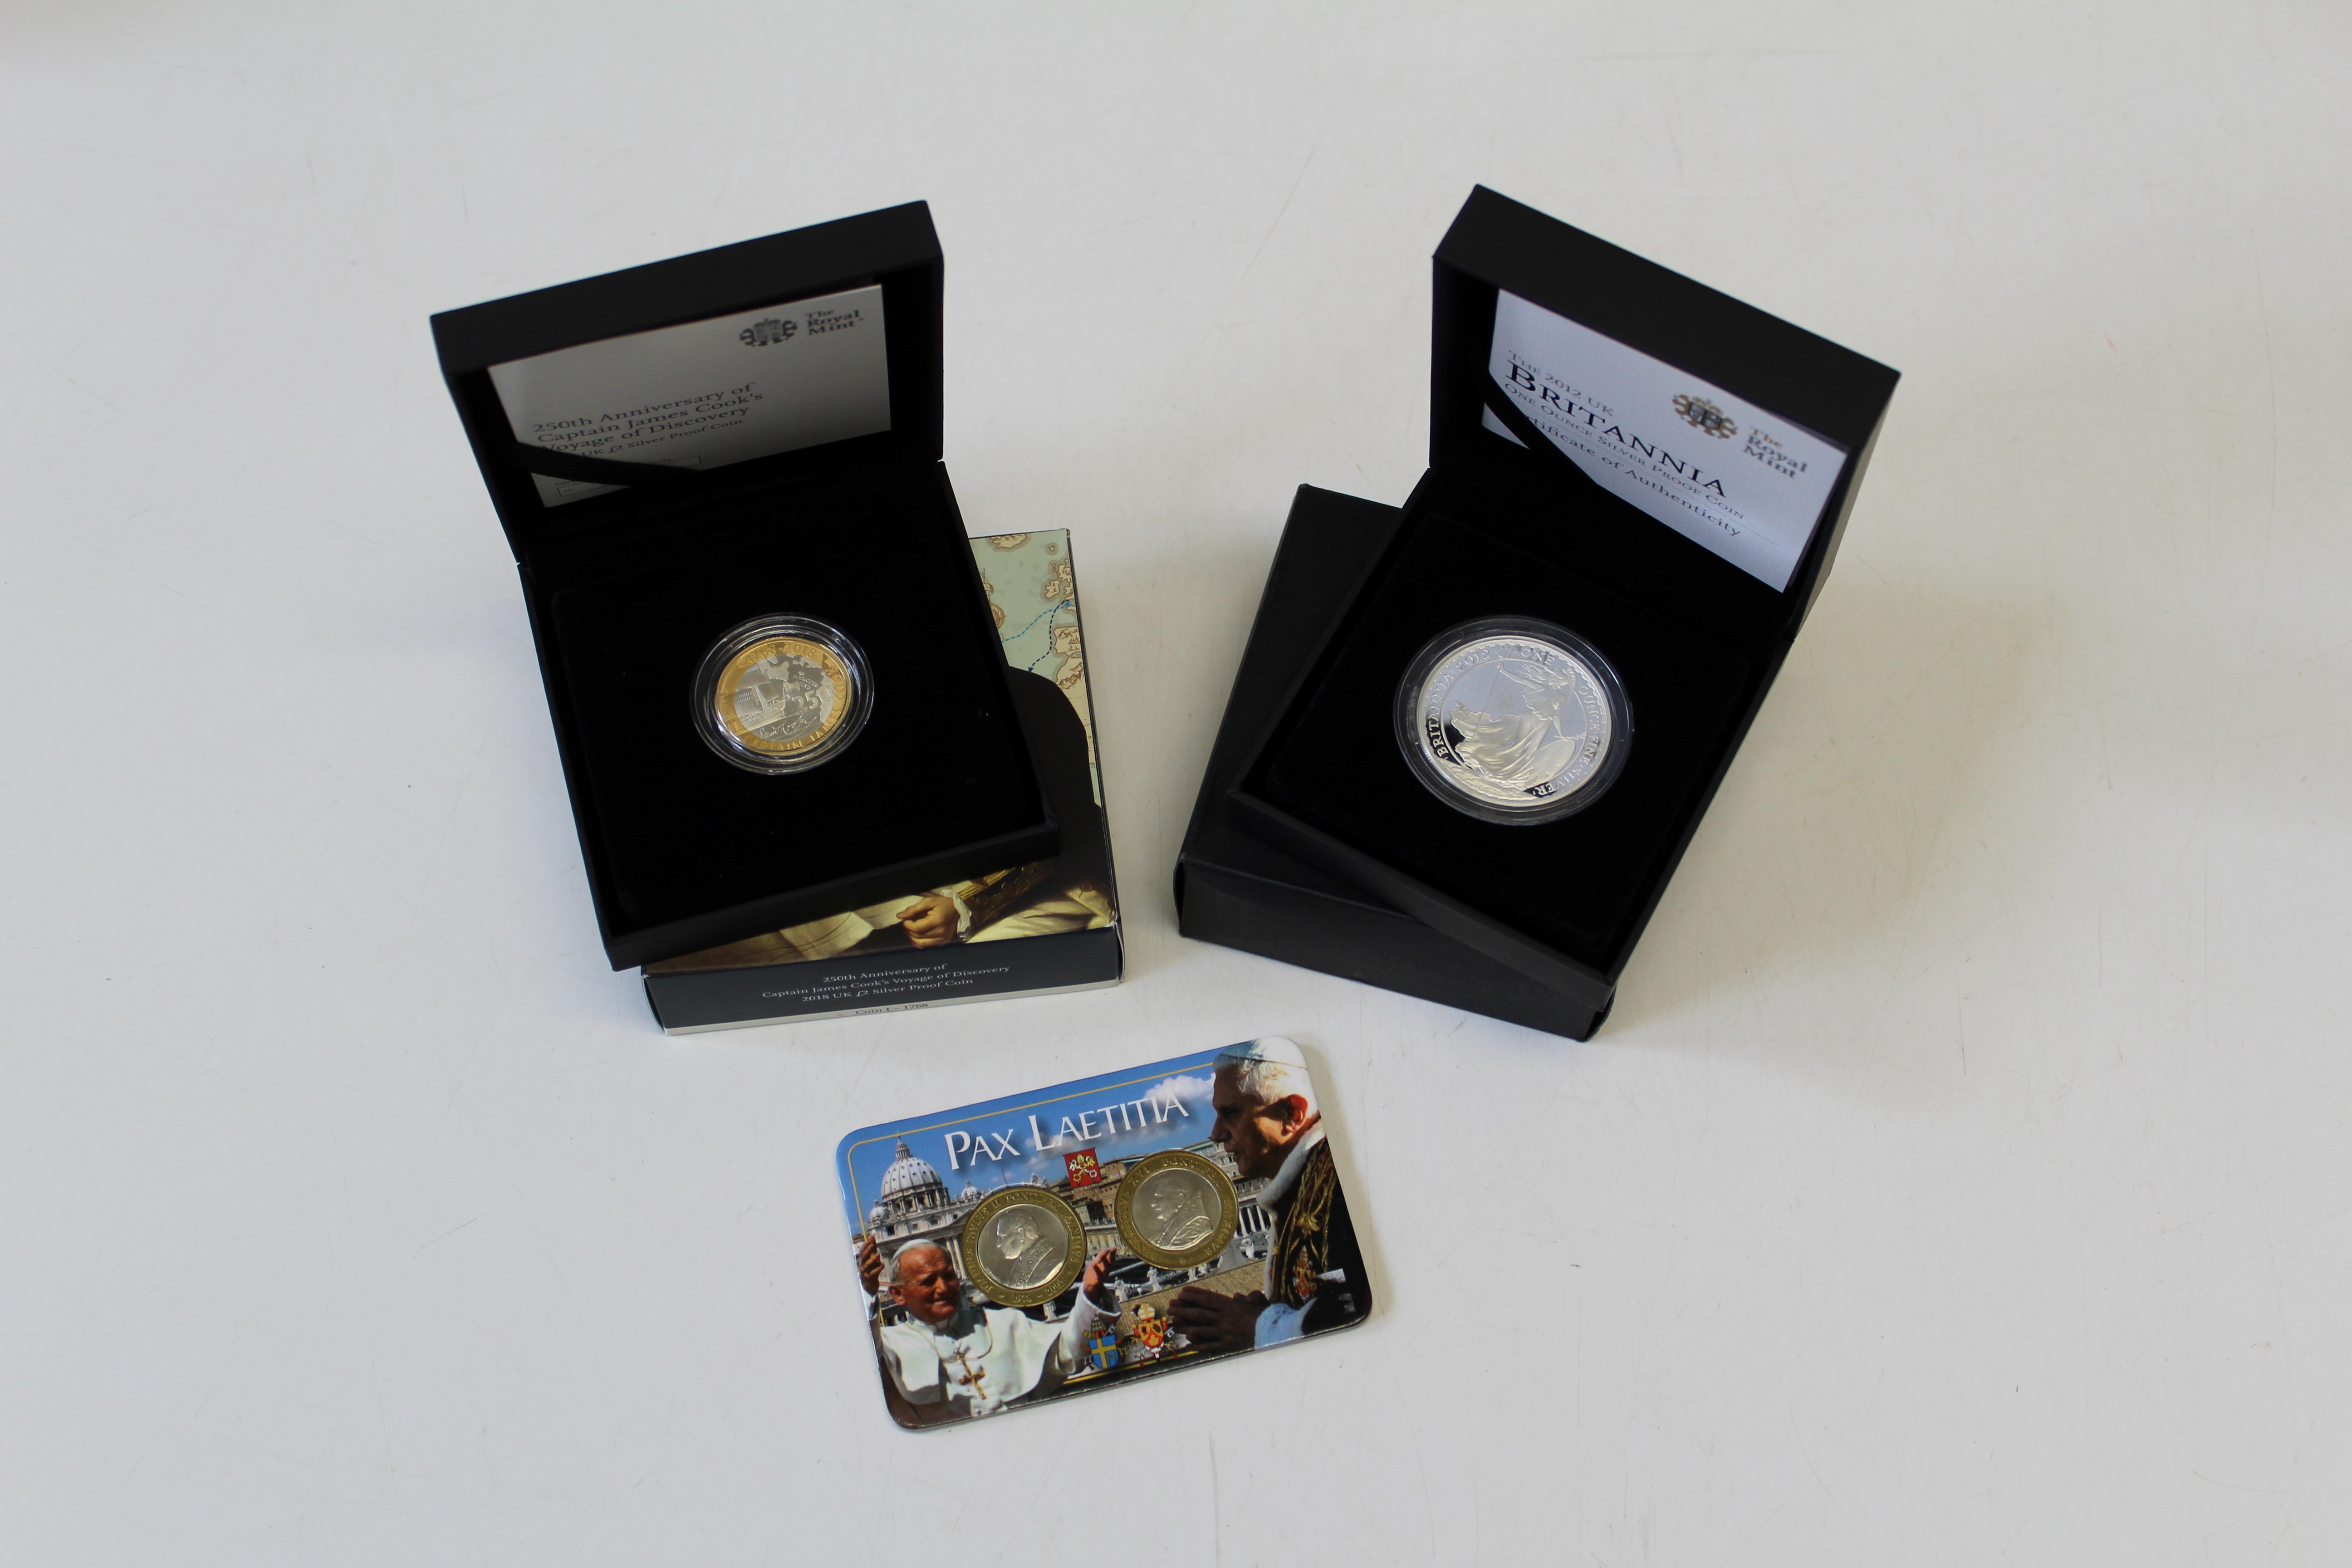 2018 UK £2 silver proof coin Captain James Cook voyage of Discovery plus two Vatican commemorative